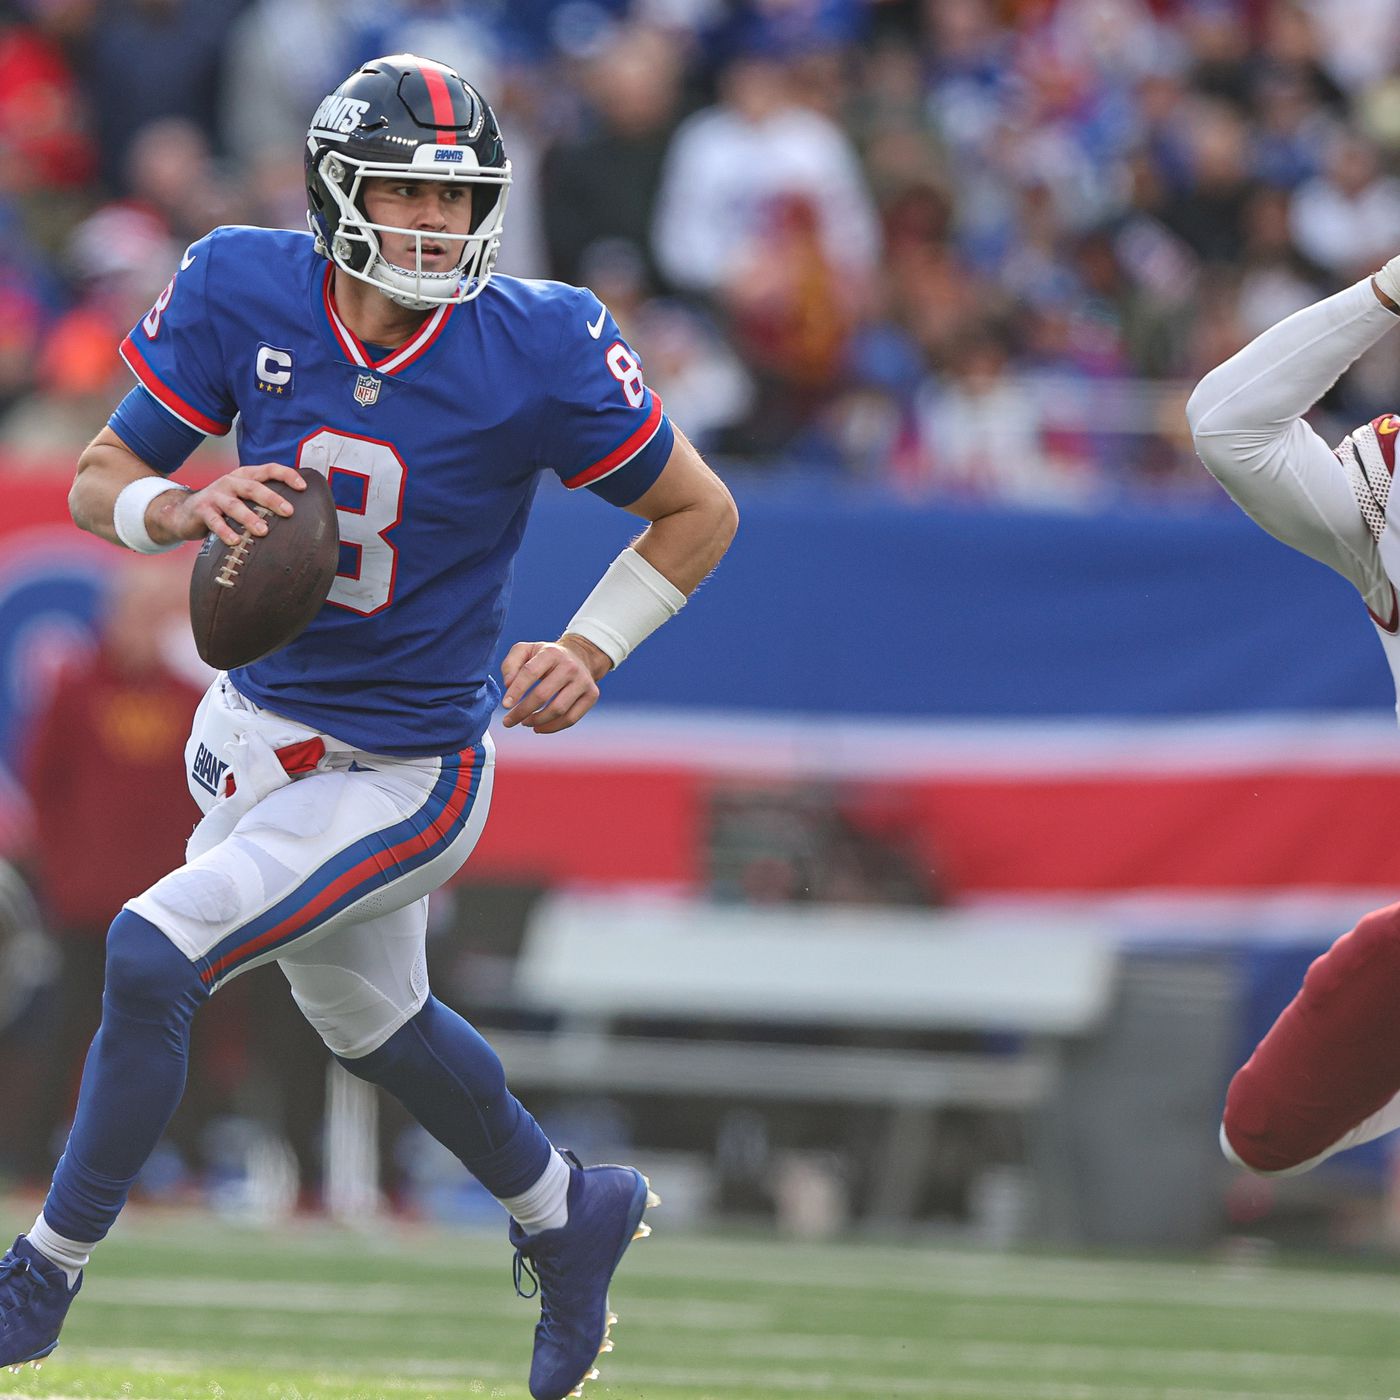 New York Giants vs Washington Commanders: How to watch live for